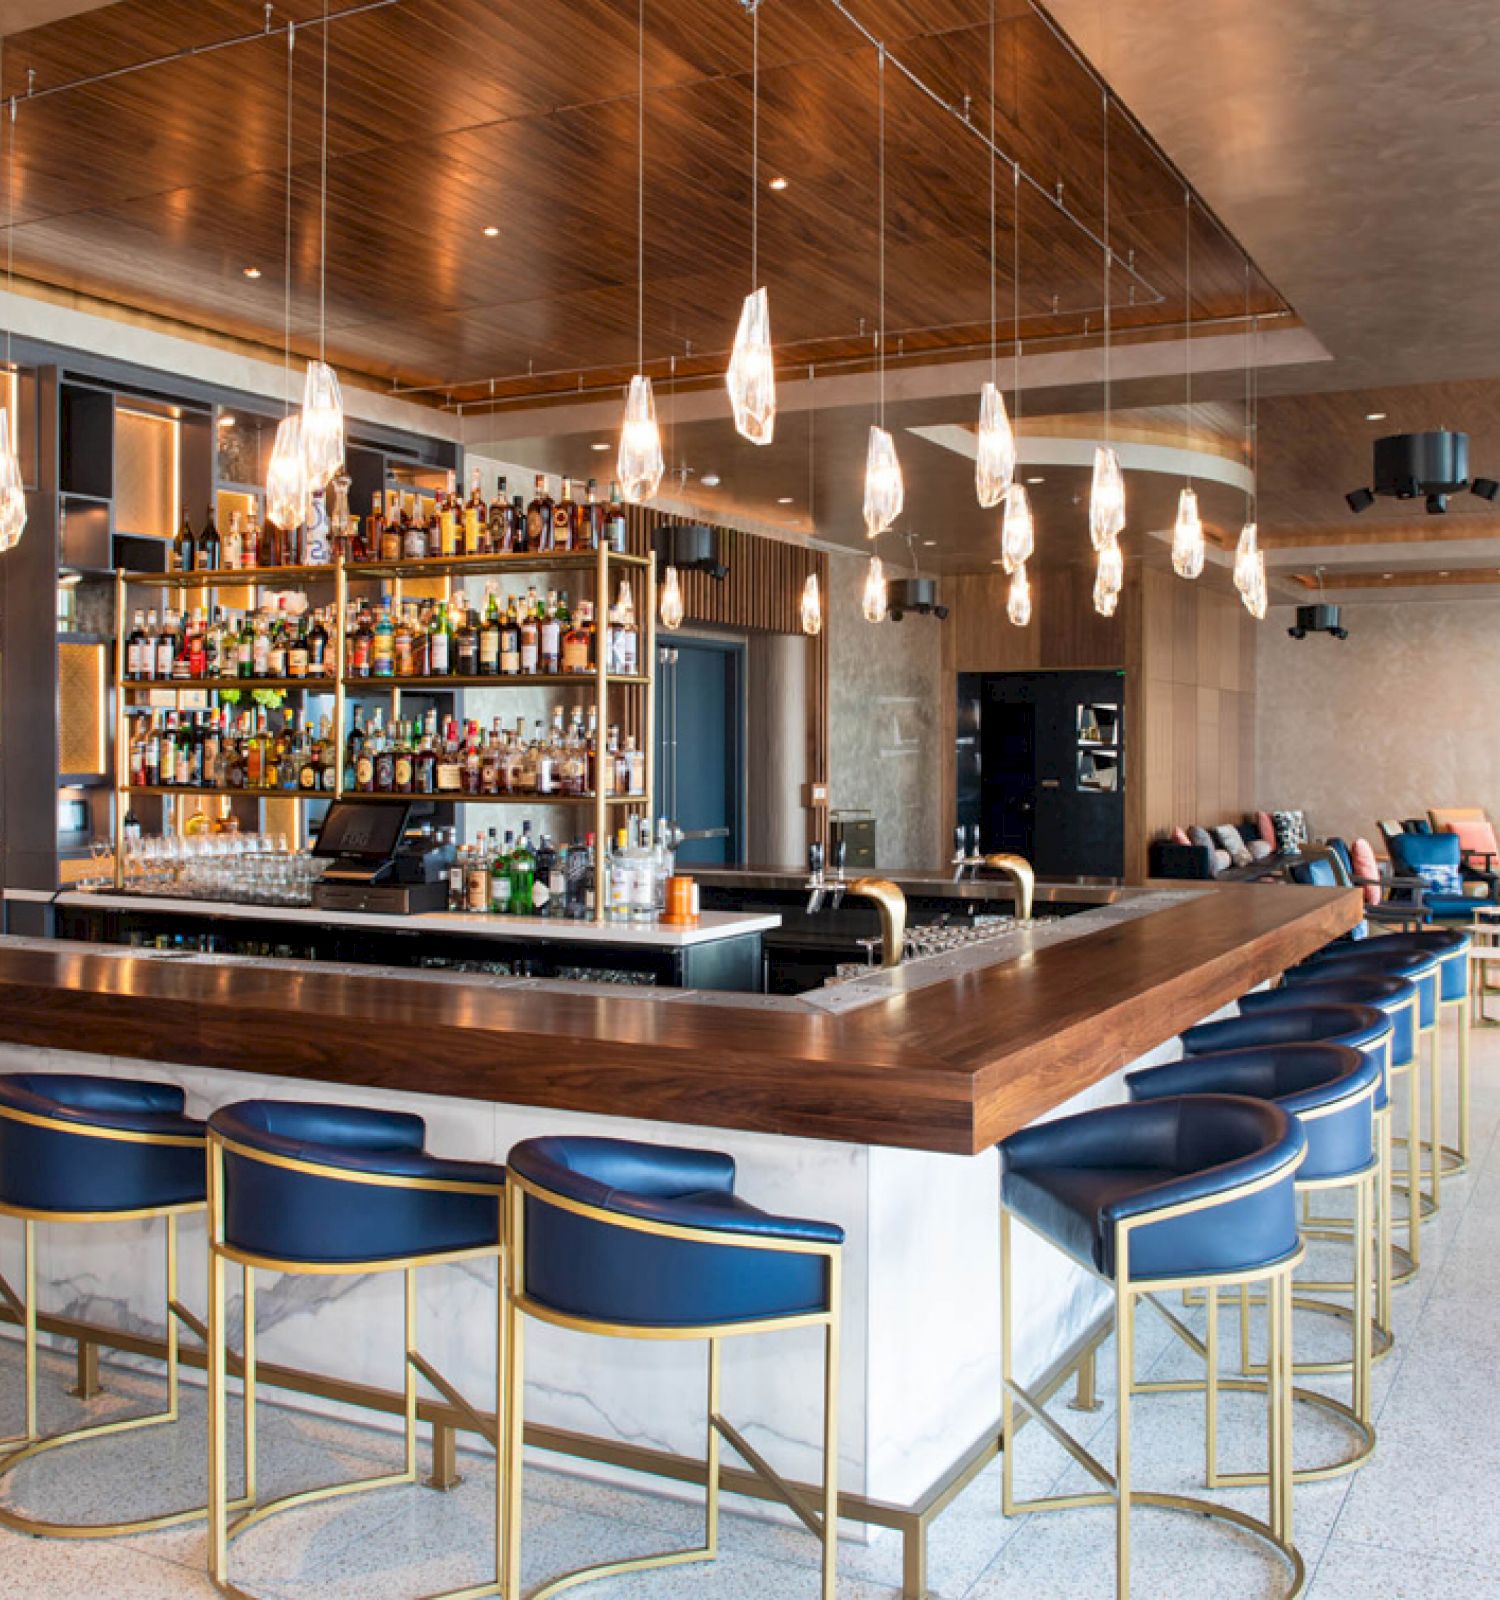 This image shows a modern bar with a sleek design, featuring a large counter, stylish bar stools, hanging lights, and a well-stocked liquor shelf.